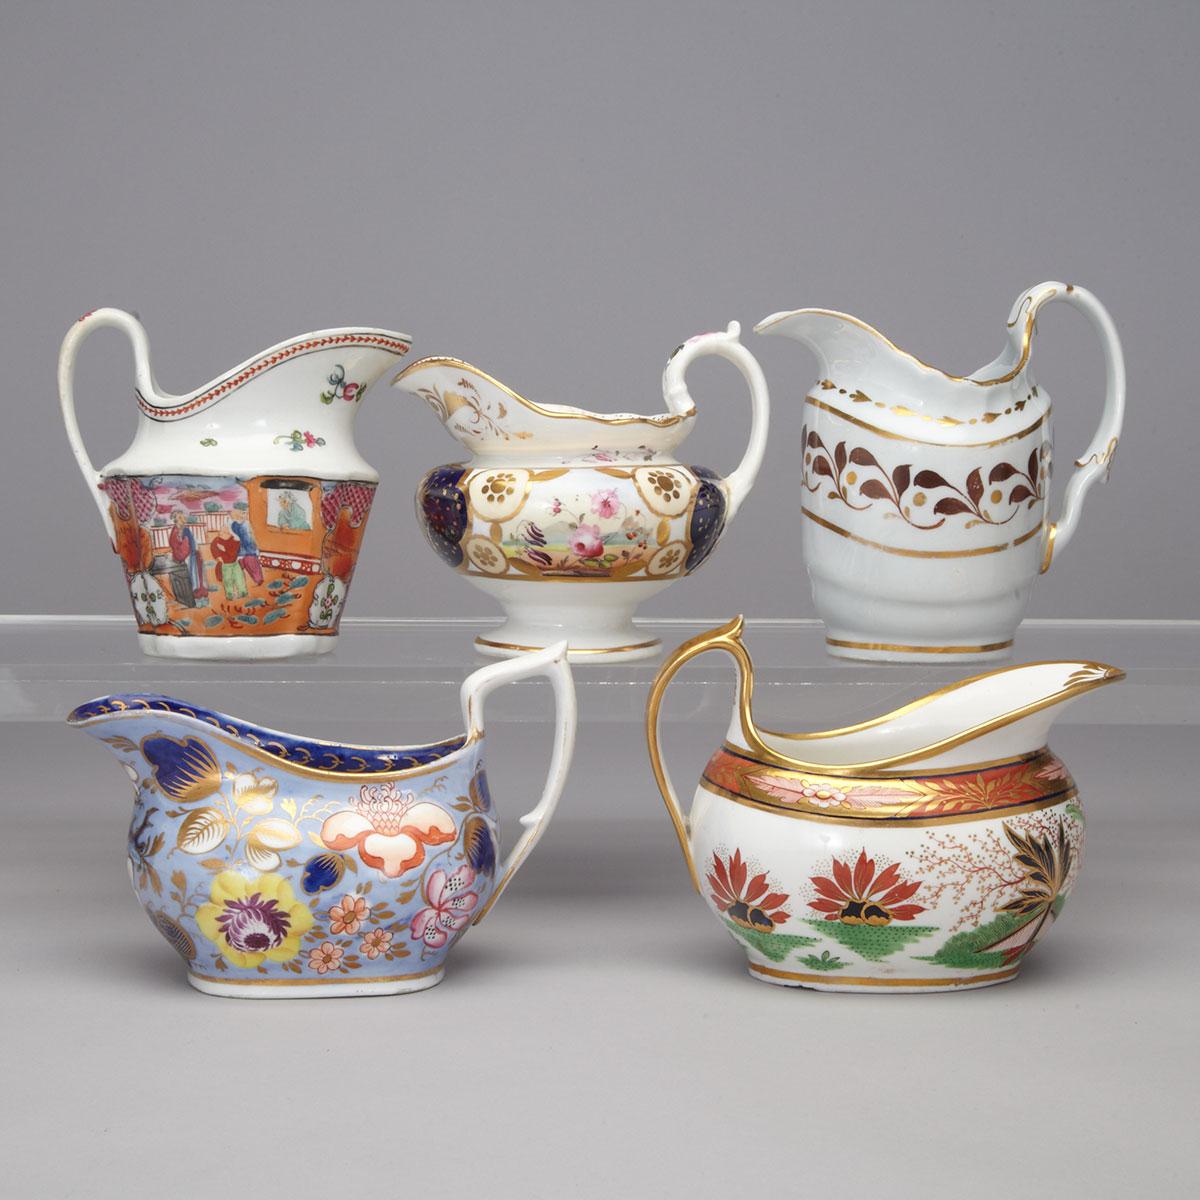 Group of Five English Porcelain Cream Jugs, late 18th/early 19th century